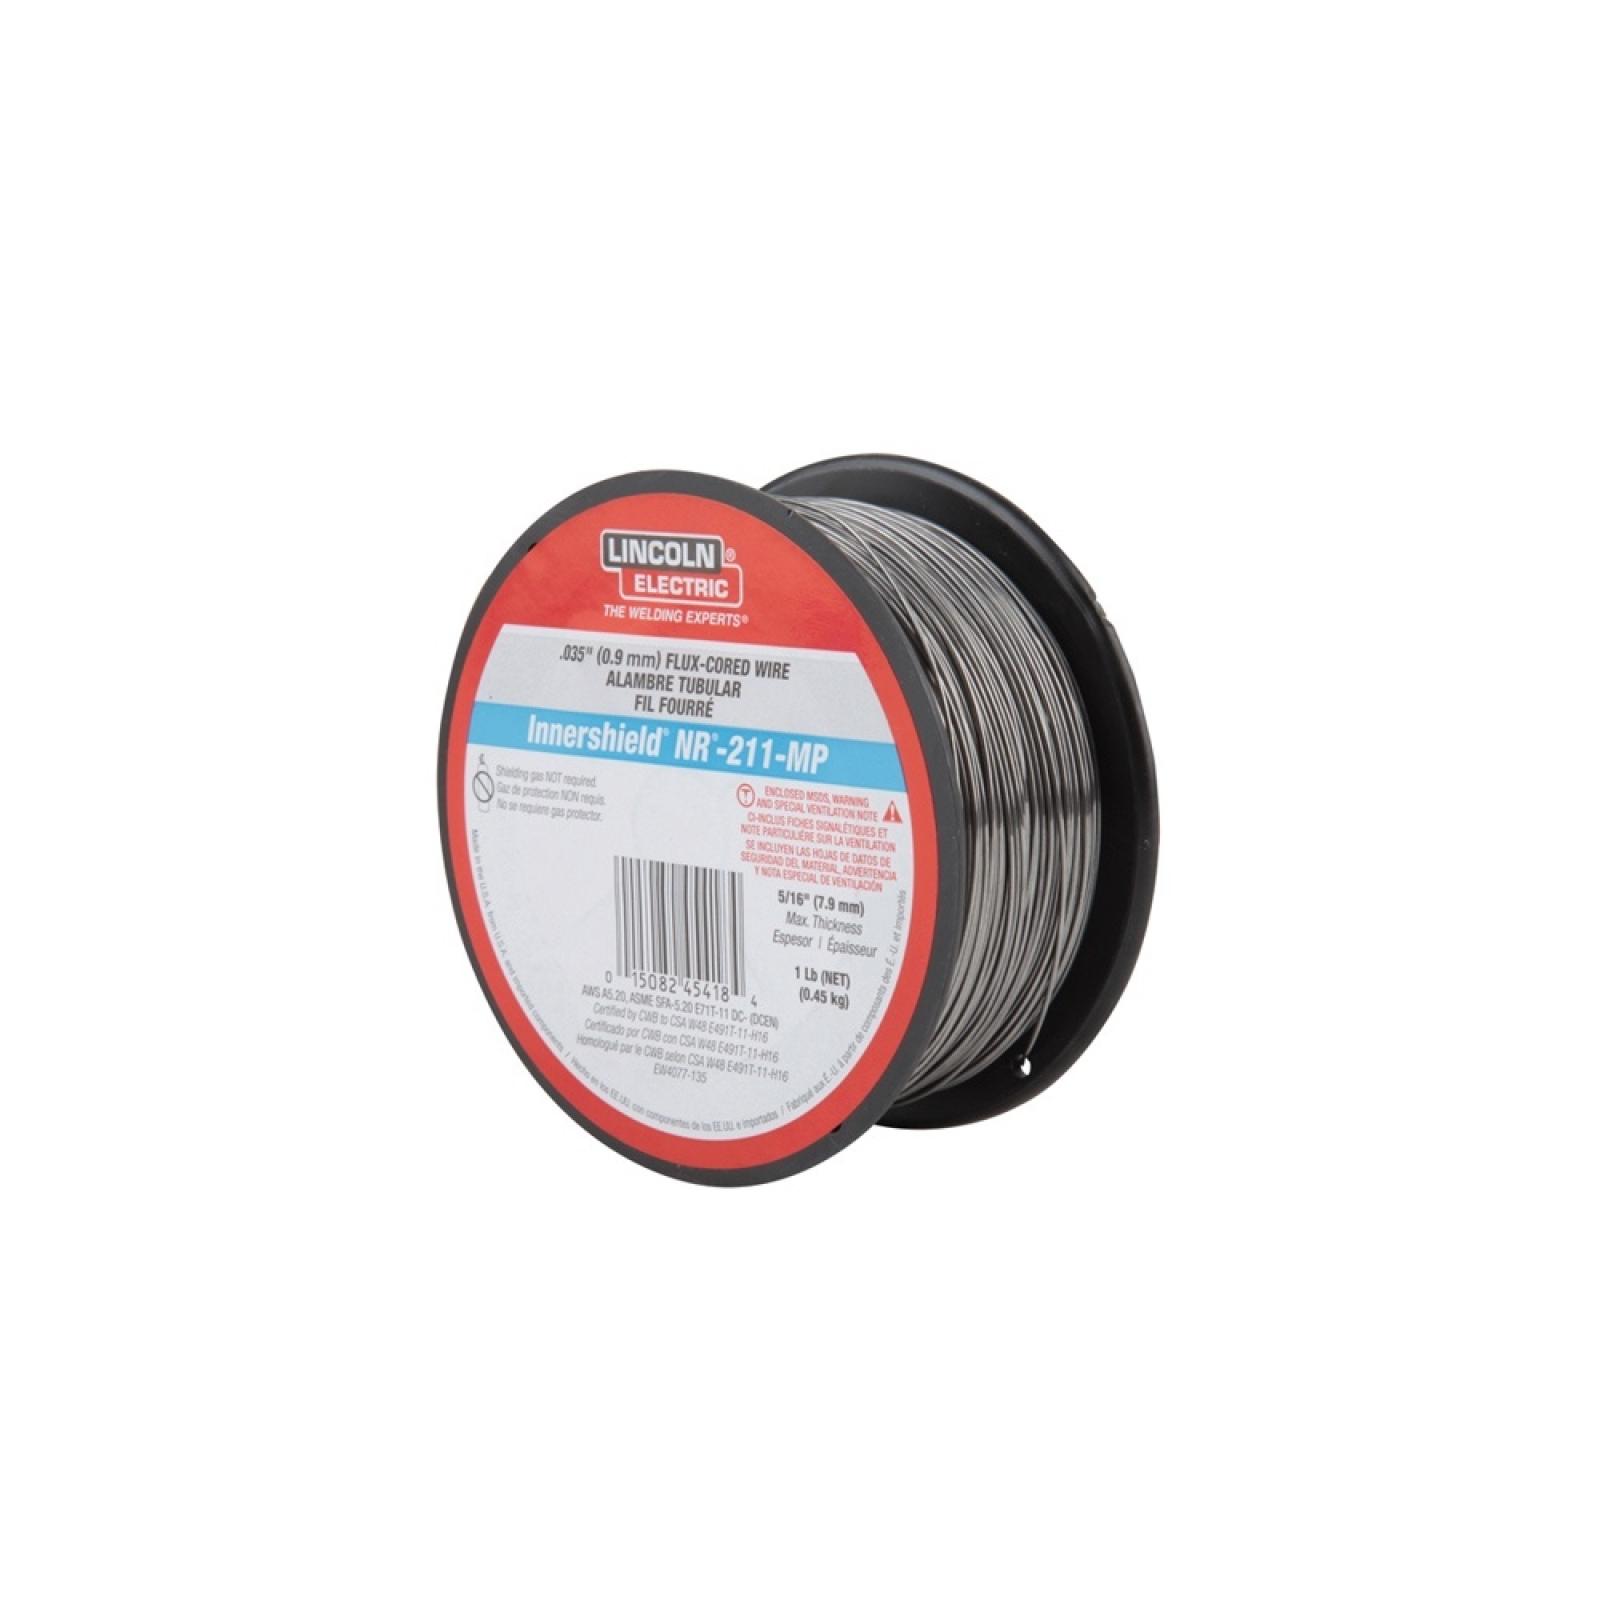 Lincoln Electric InnerShield Welding Wire